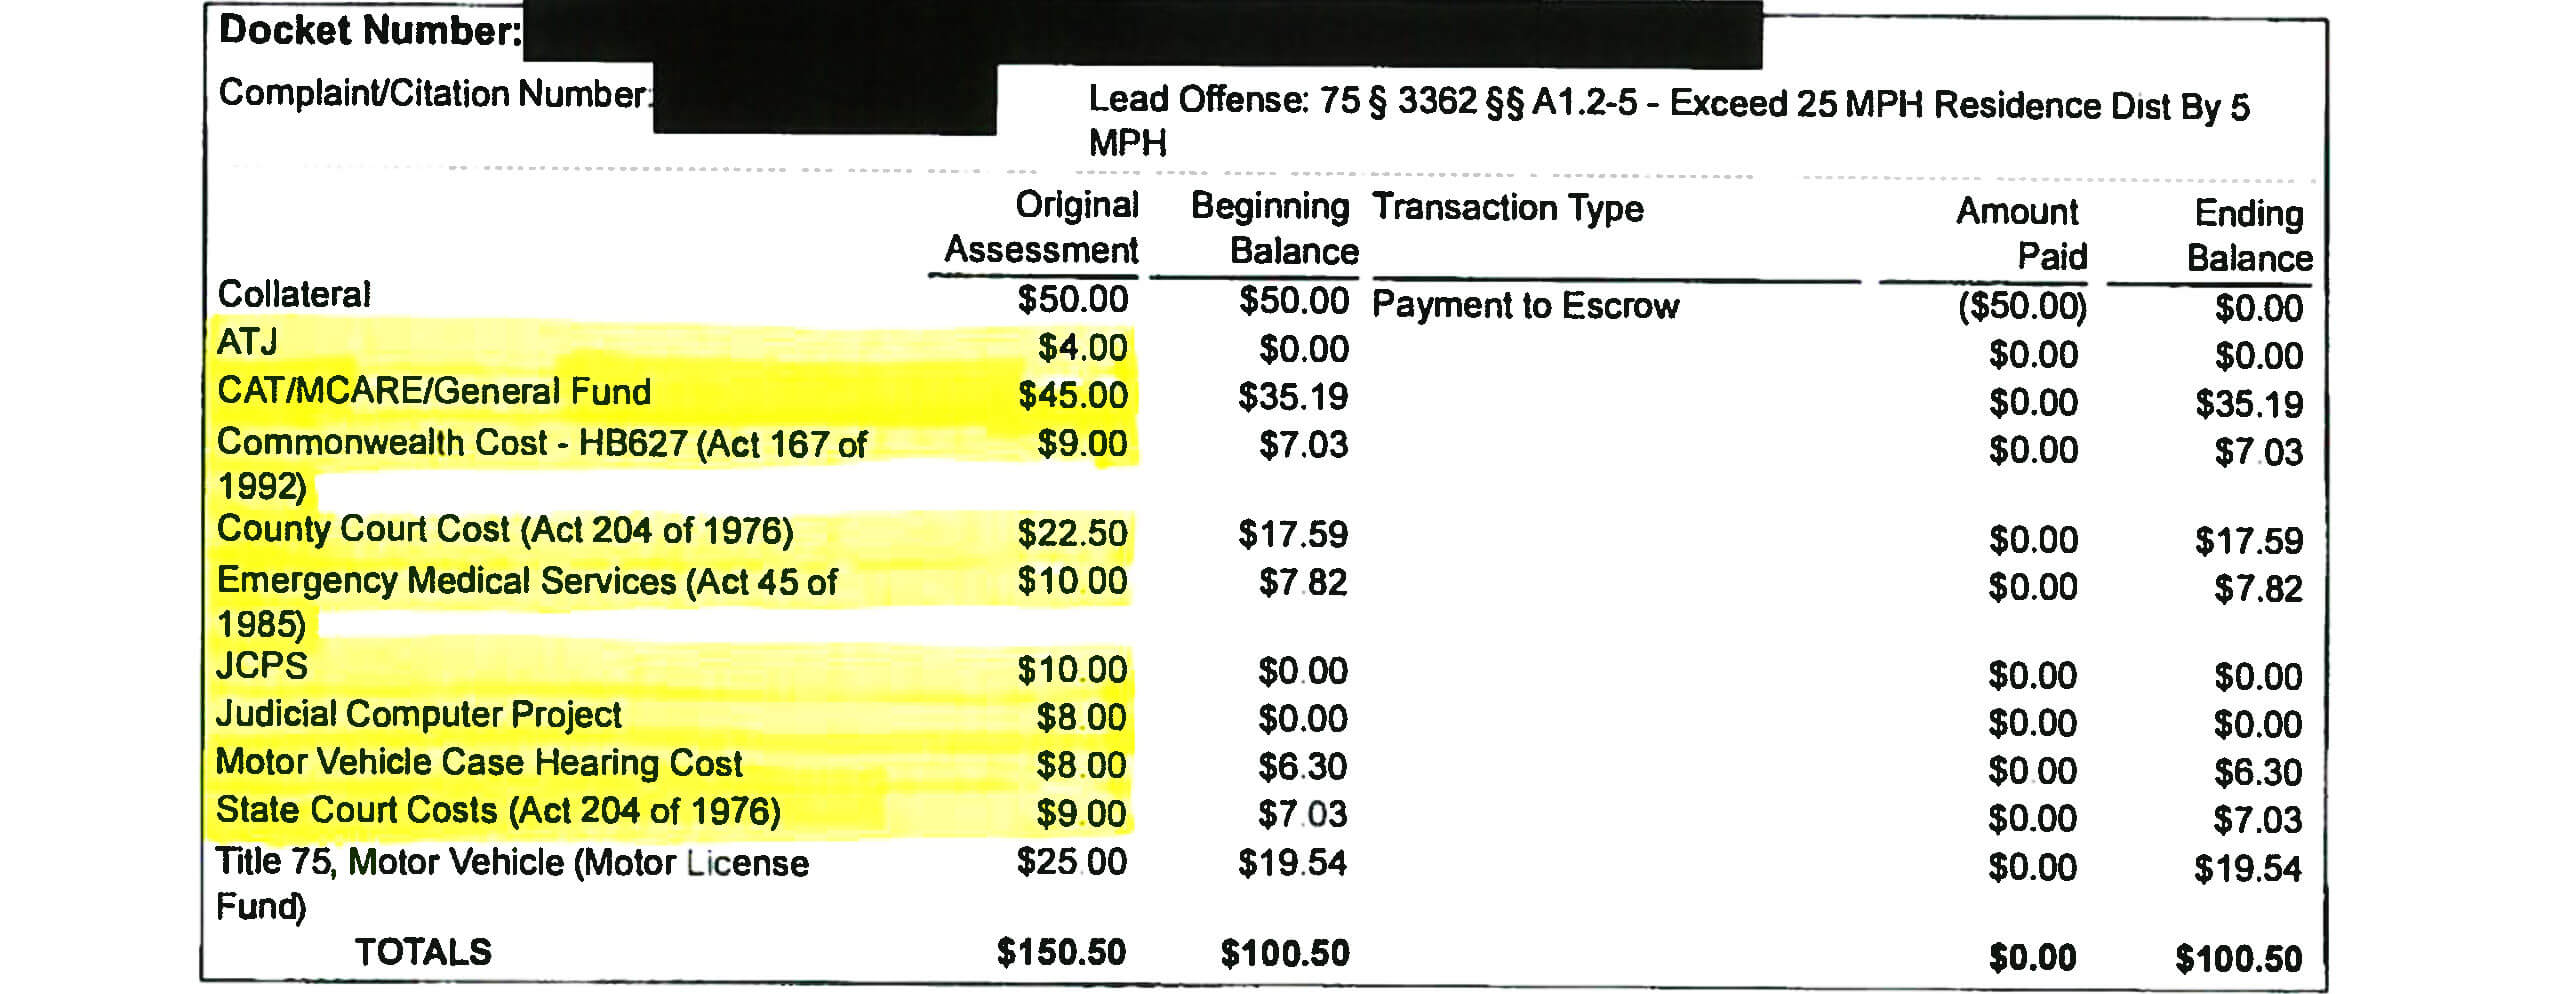 The fees, costs and surcharges on the offense add up to $125.50…